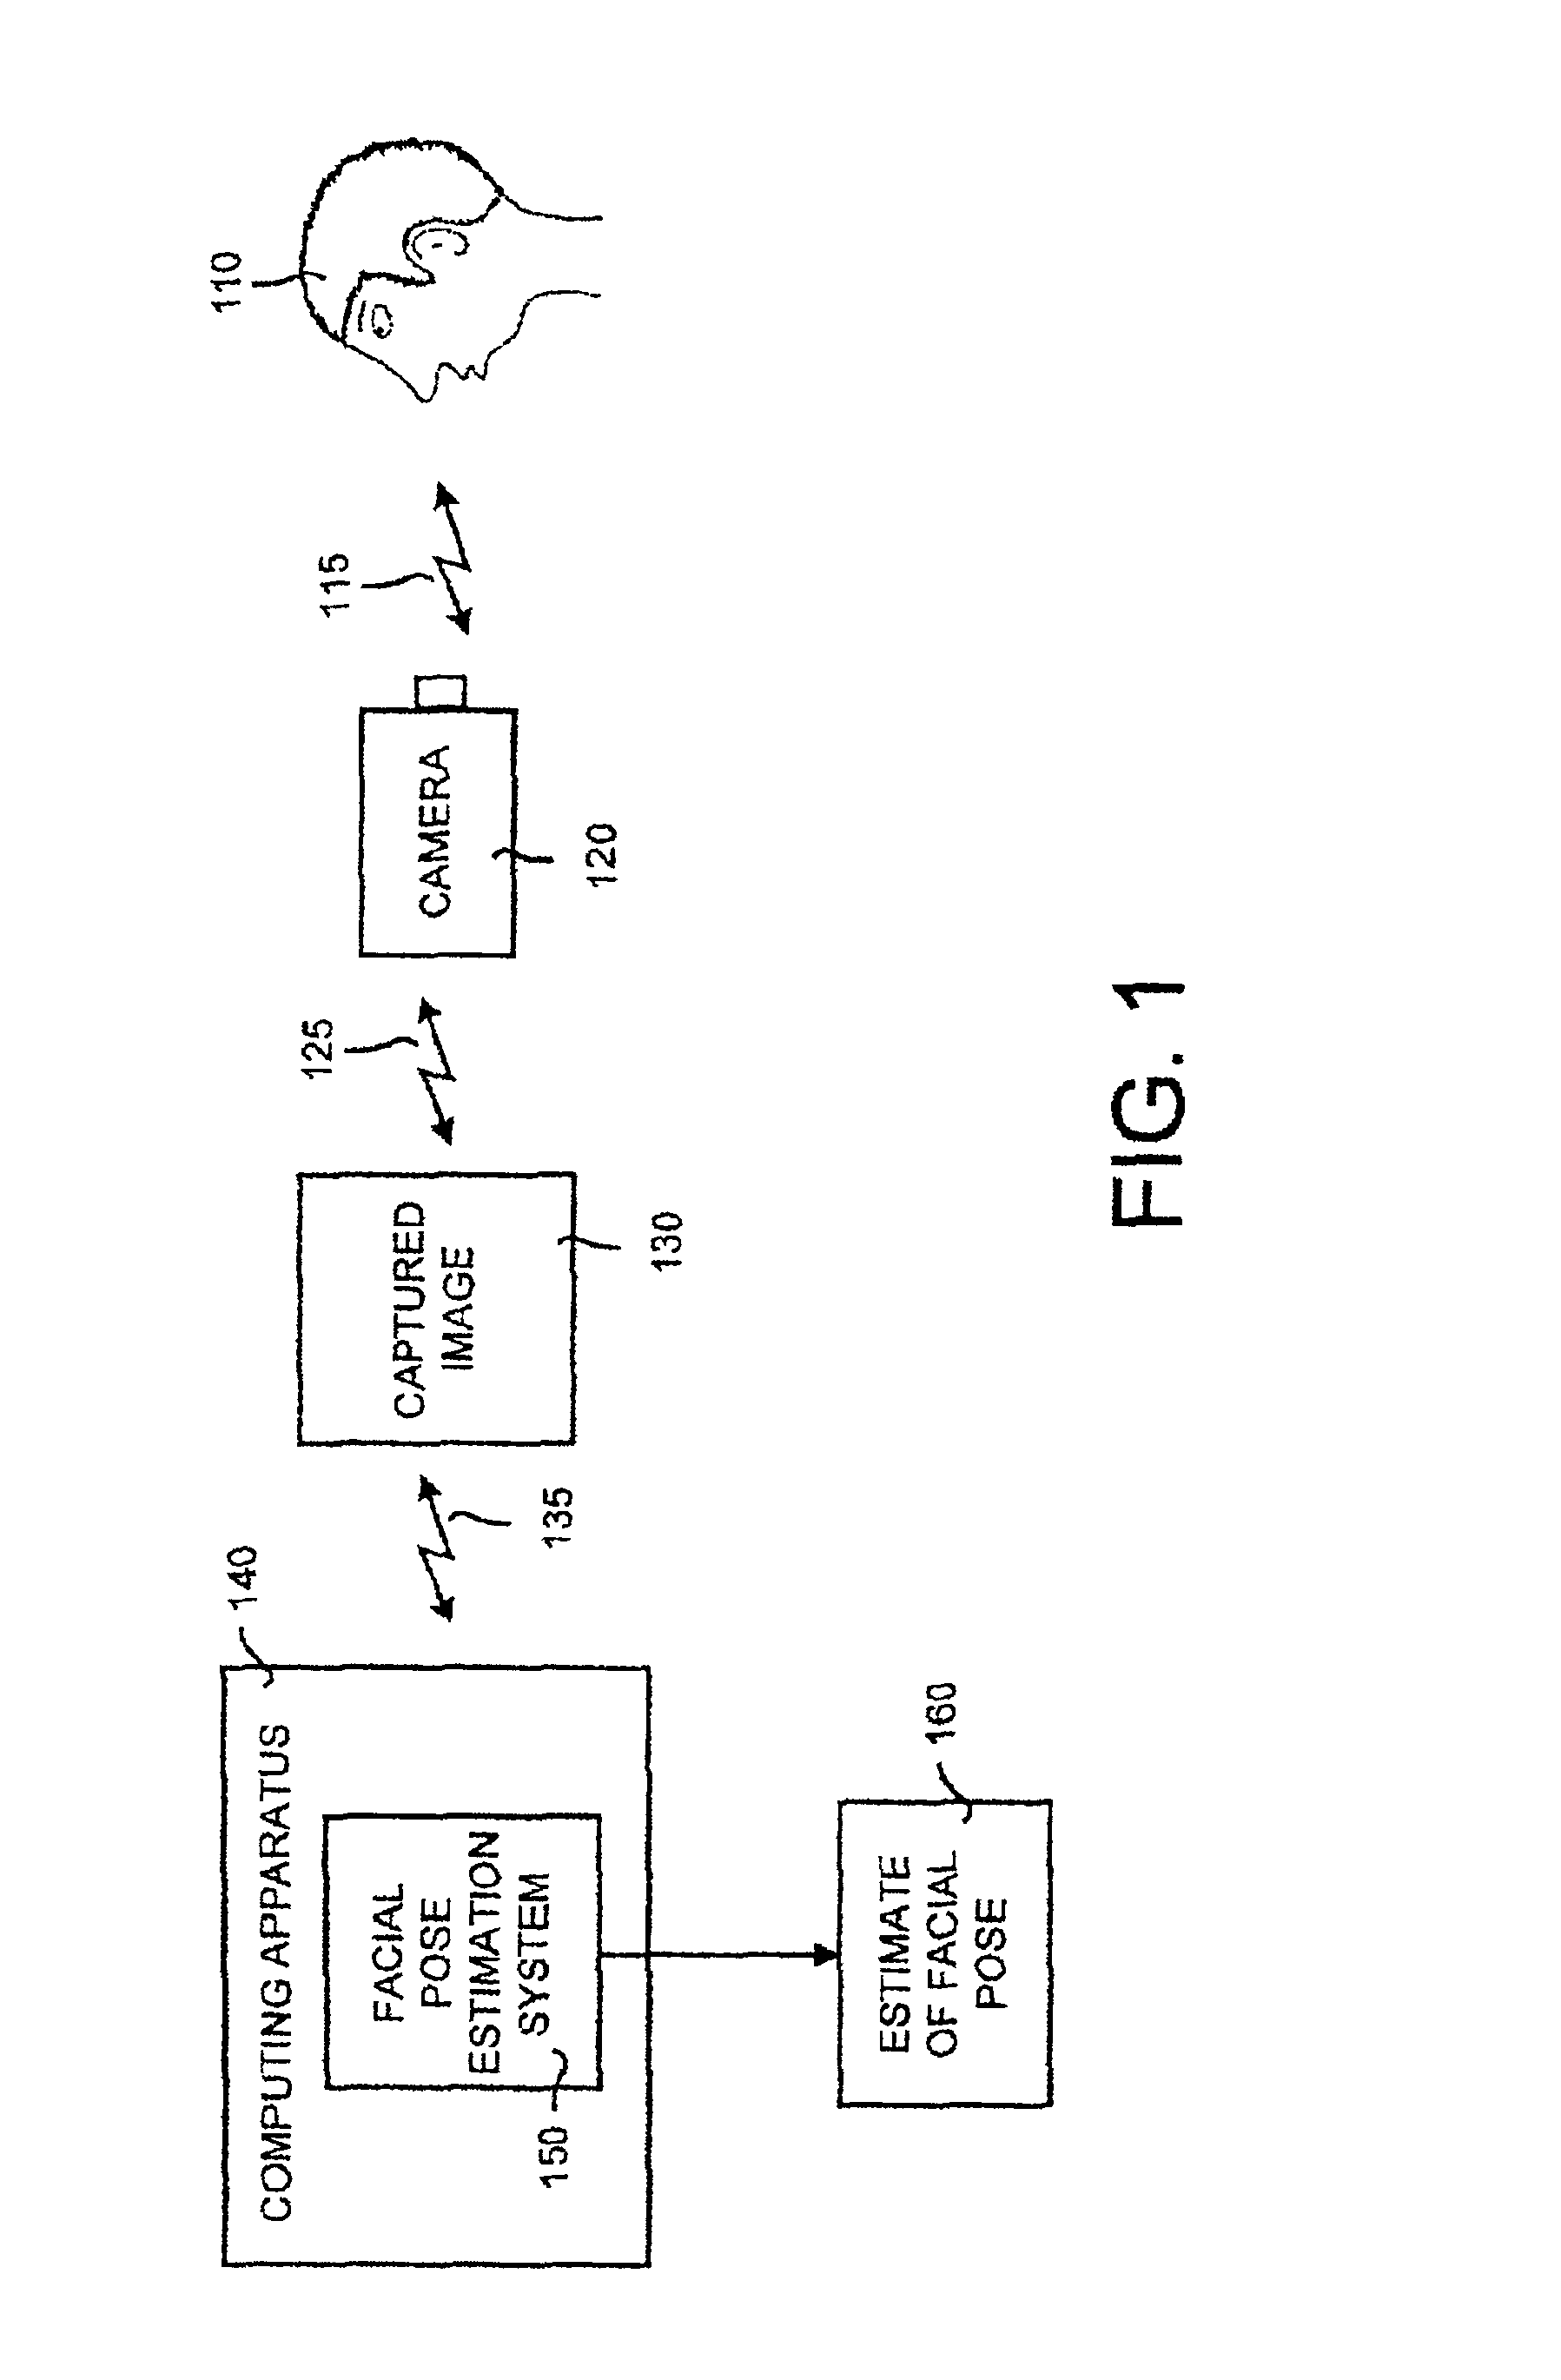 Machine vision system and method for estimating and tracking facial pose